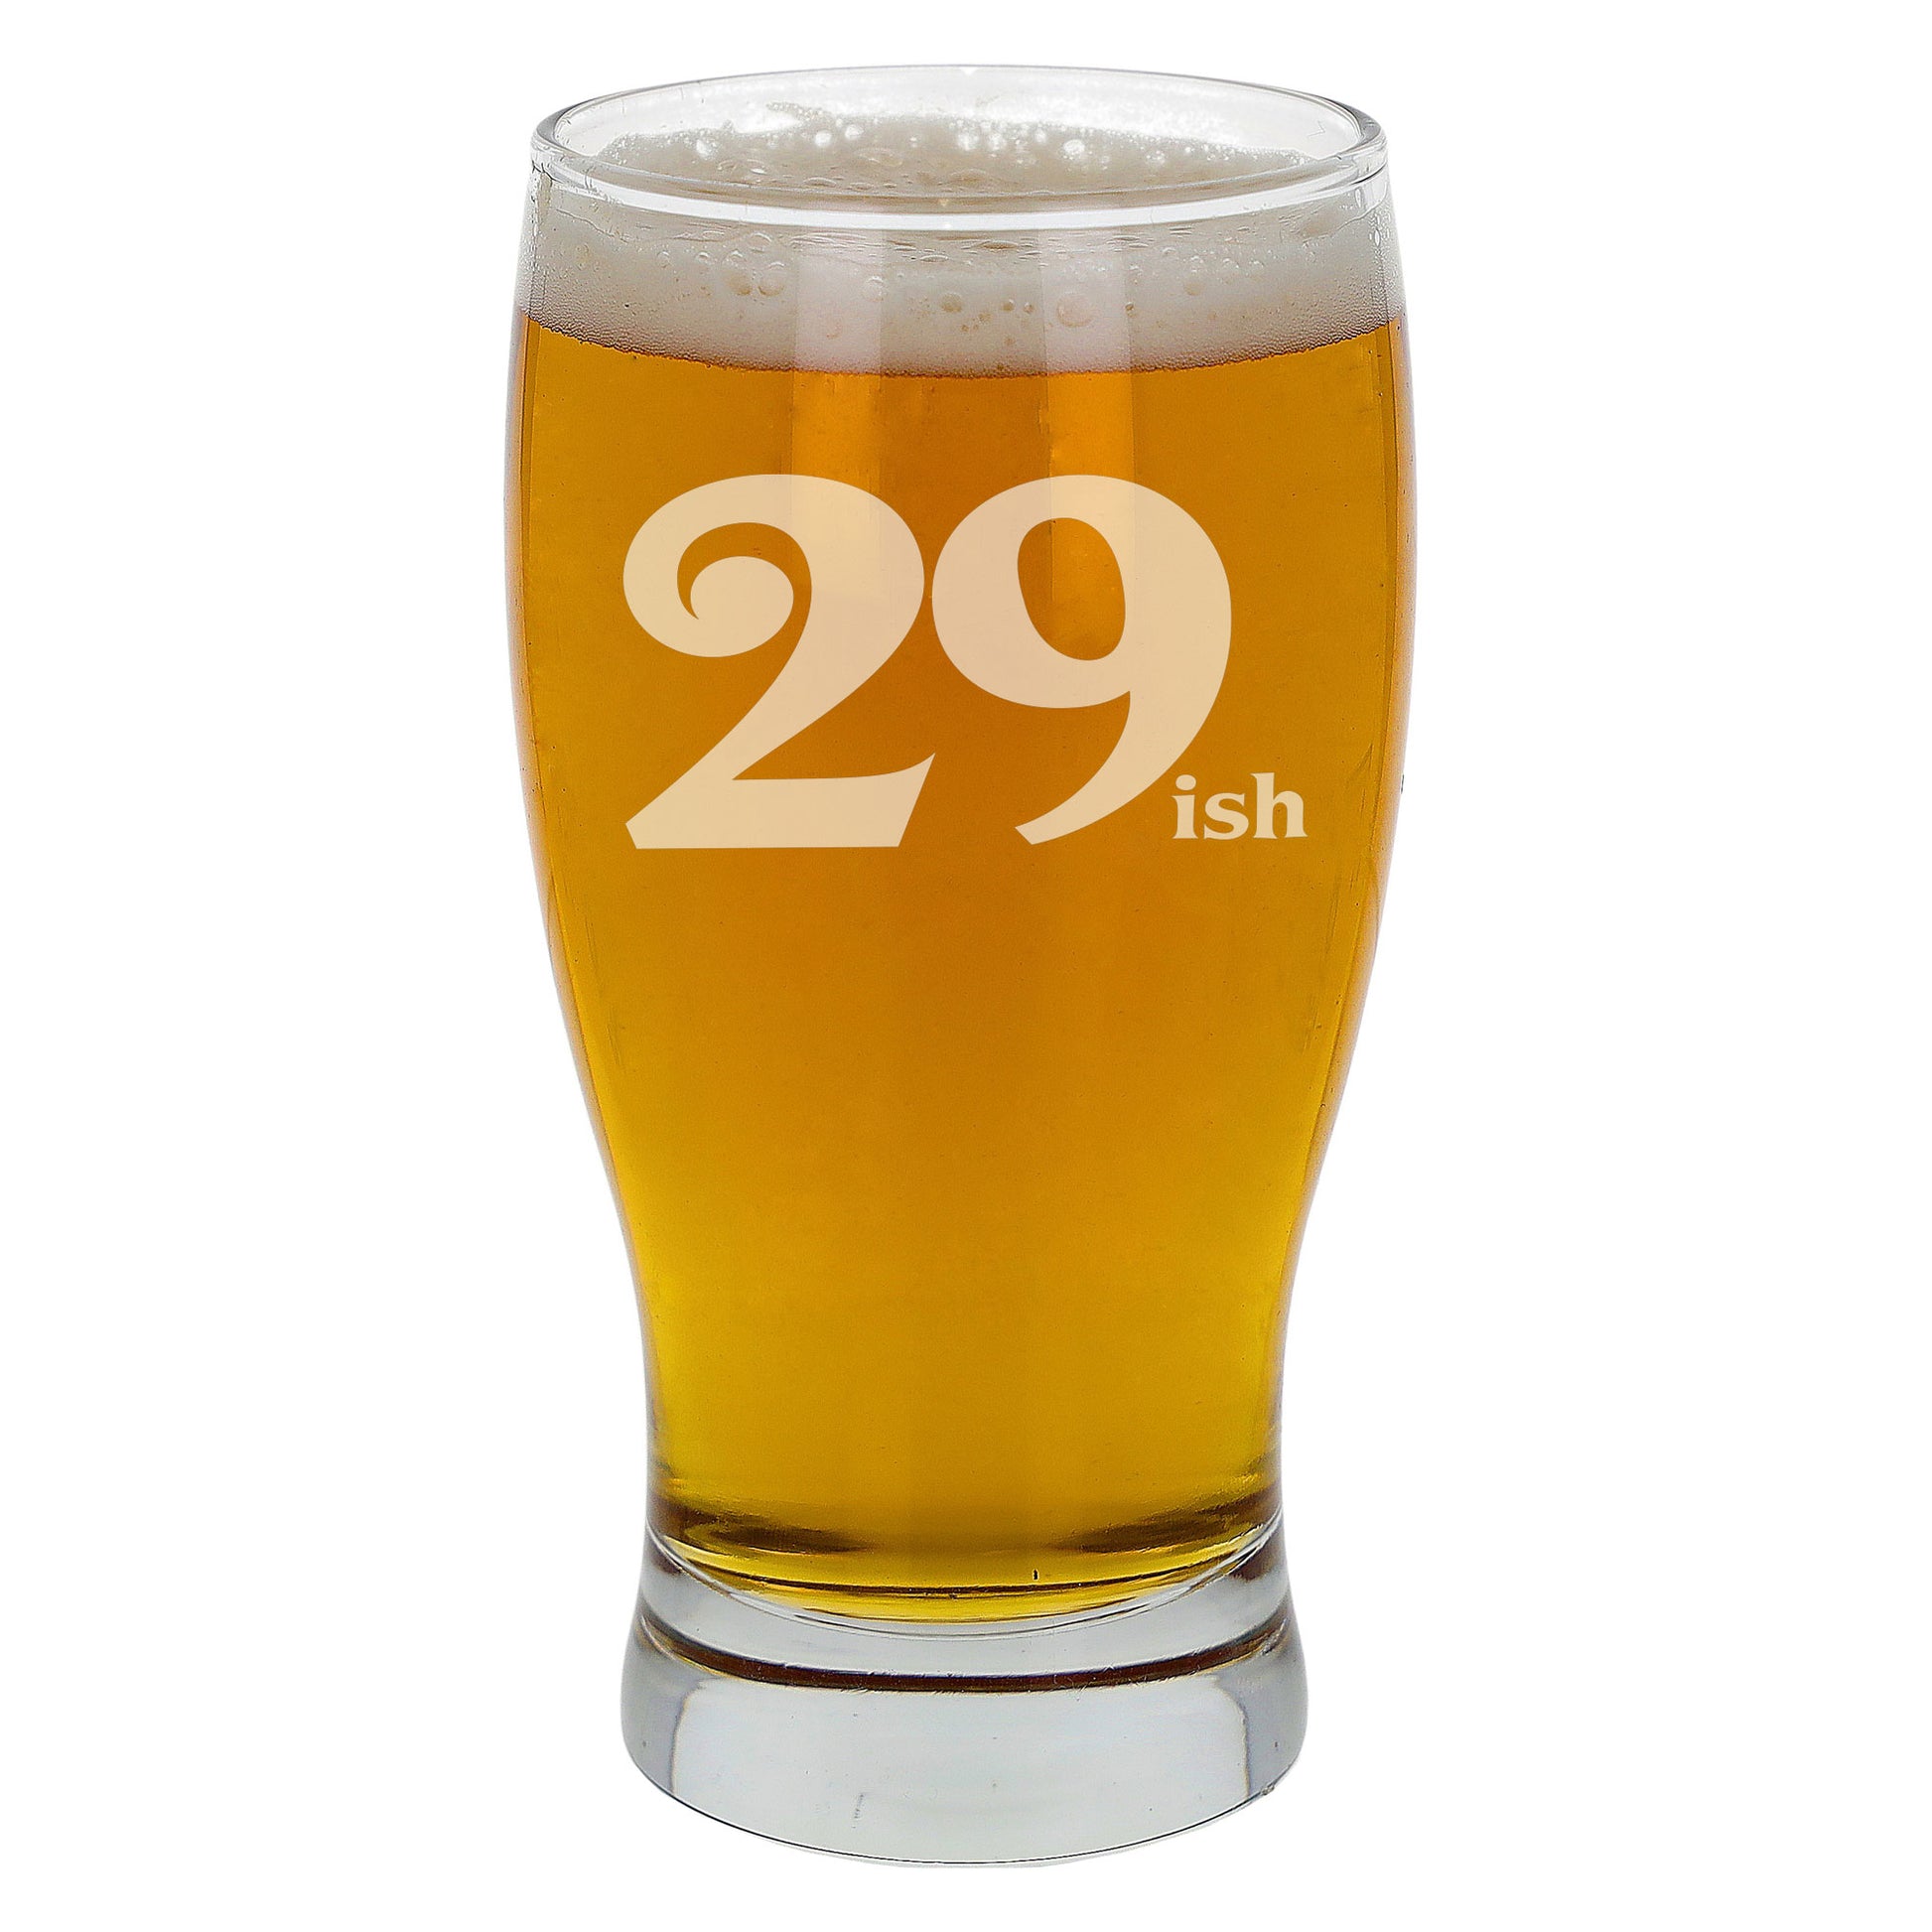 29ish Pint Glass and/or Coaster Set  - Always Looking Good -   